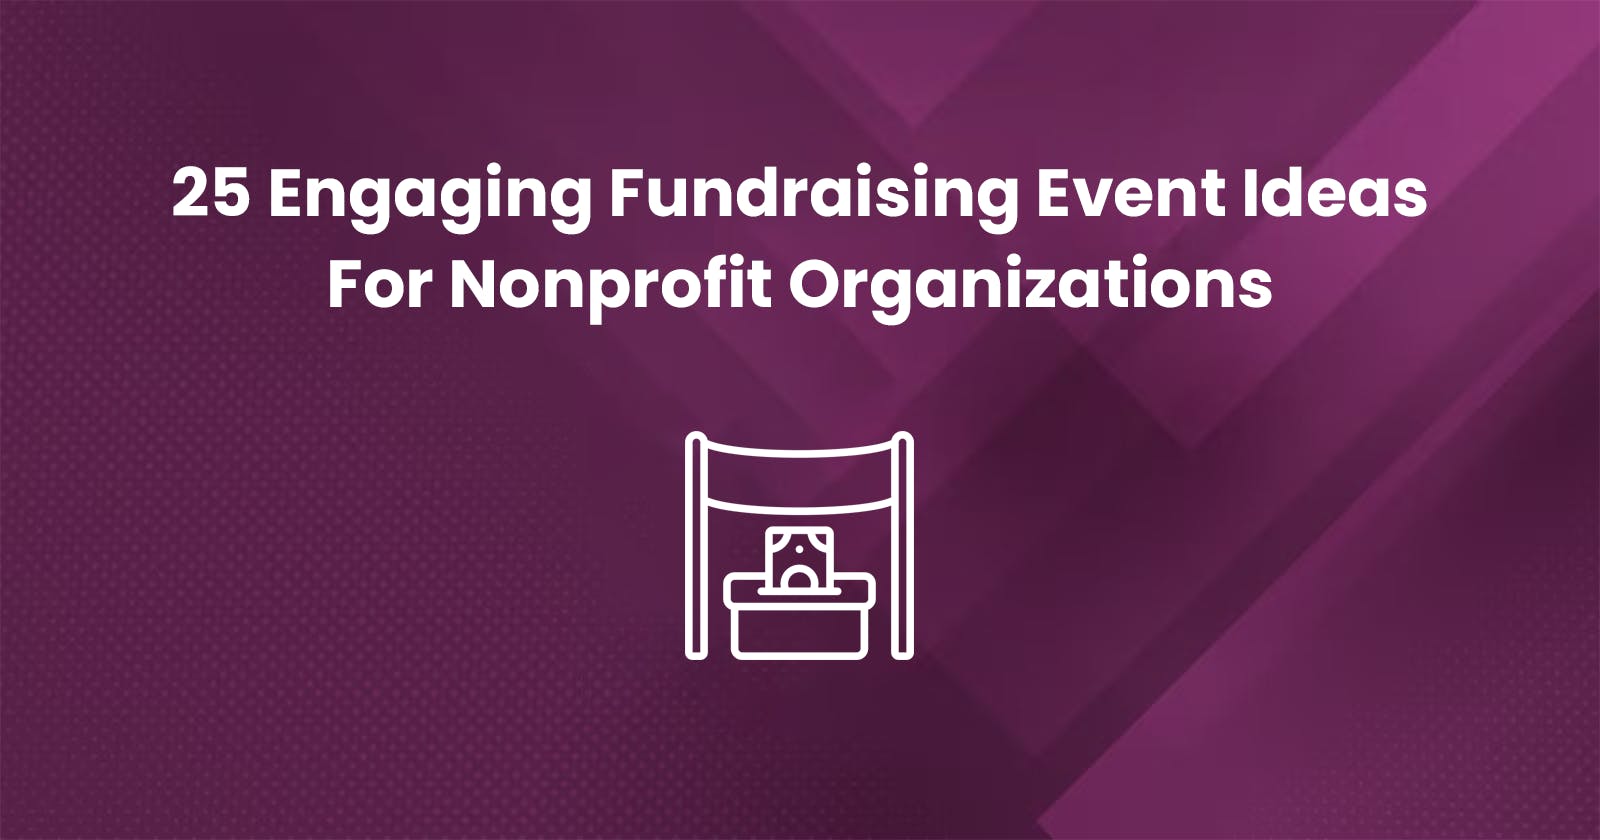 25 Engaging Fundraising Event Ideas For Nonprofit Organizations